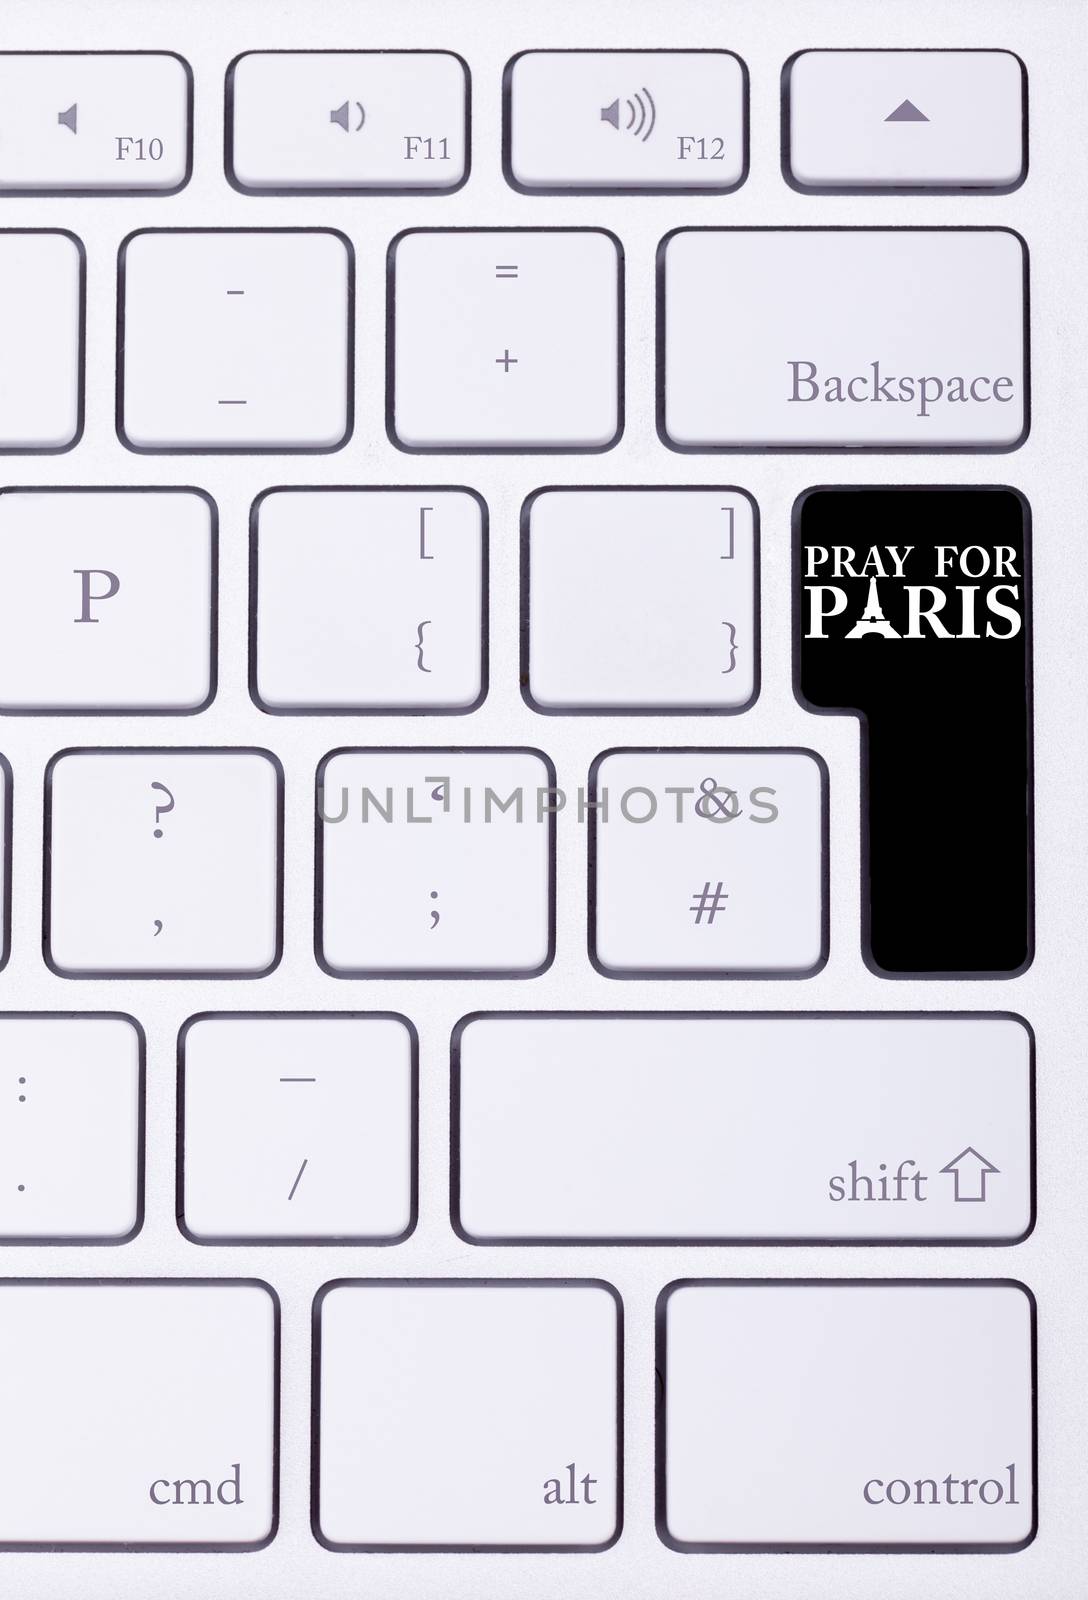 Black button on keyboard with pray for paris sign on it. International suport for Paris victims in terrorist atack